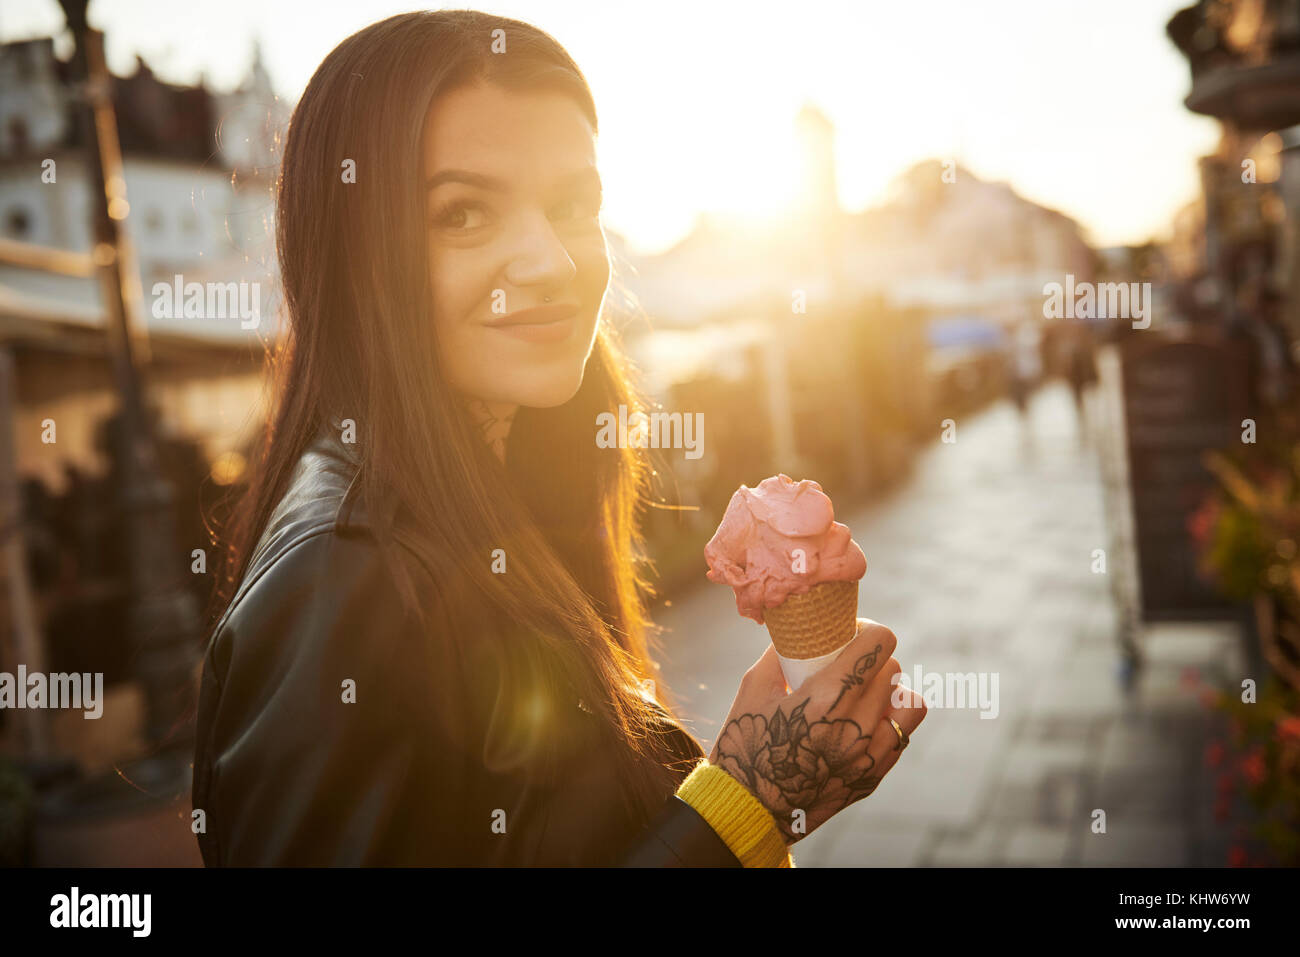 Portrait of young woman holding ice cream, tattoos on hand Stock Photo